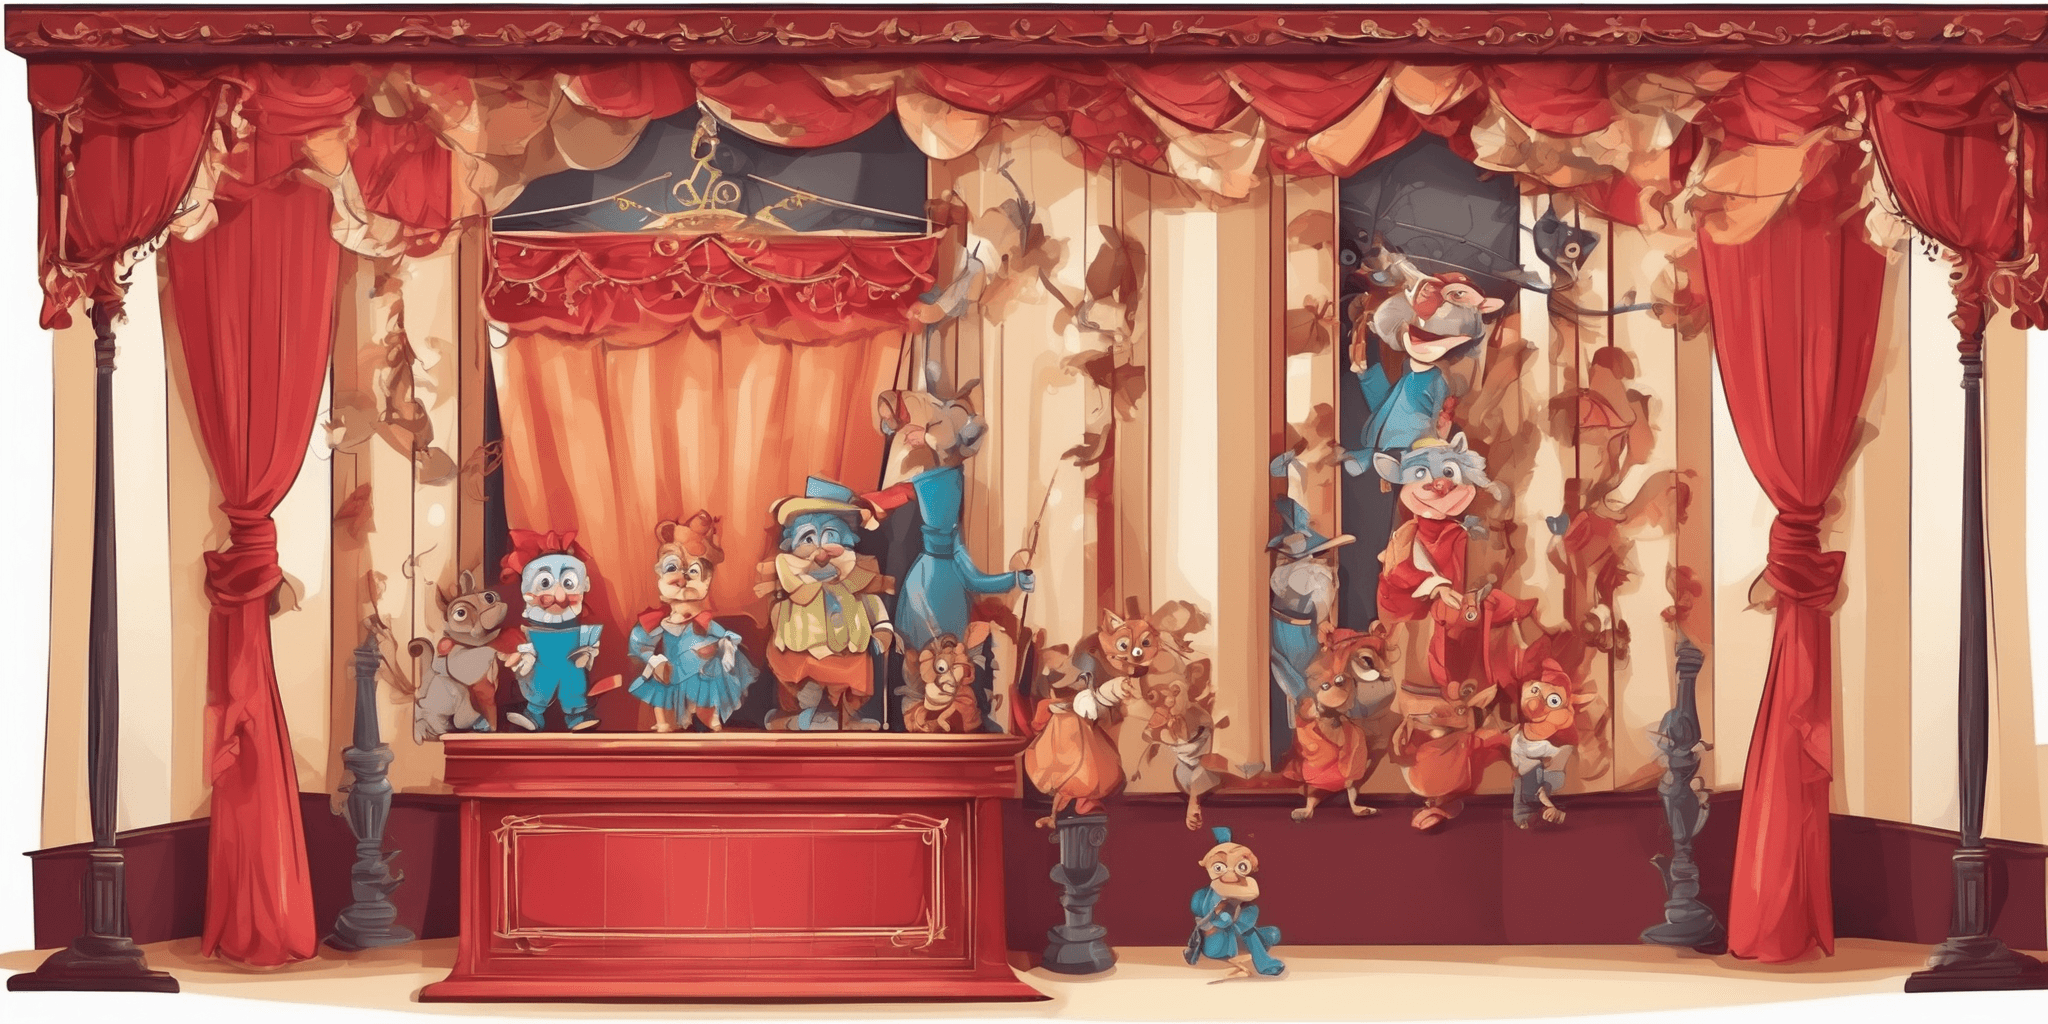 Puppet theater in illustration style with gradients and white background